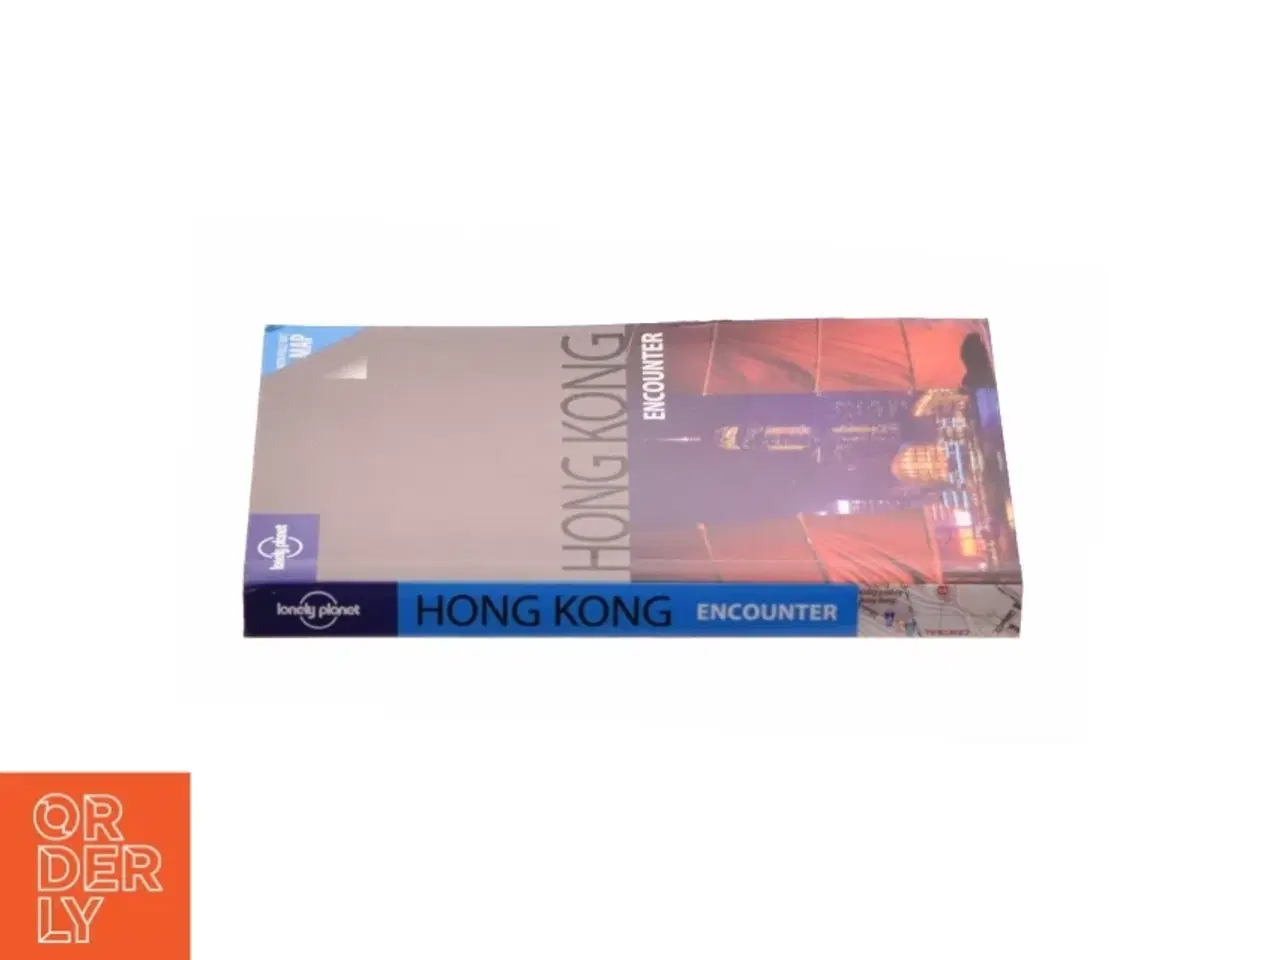 Billede 3 - Hong Kong by Ff, Stone, Andrew Lonely Planet Publications Staff af Andrew Stone (Bog)